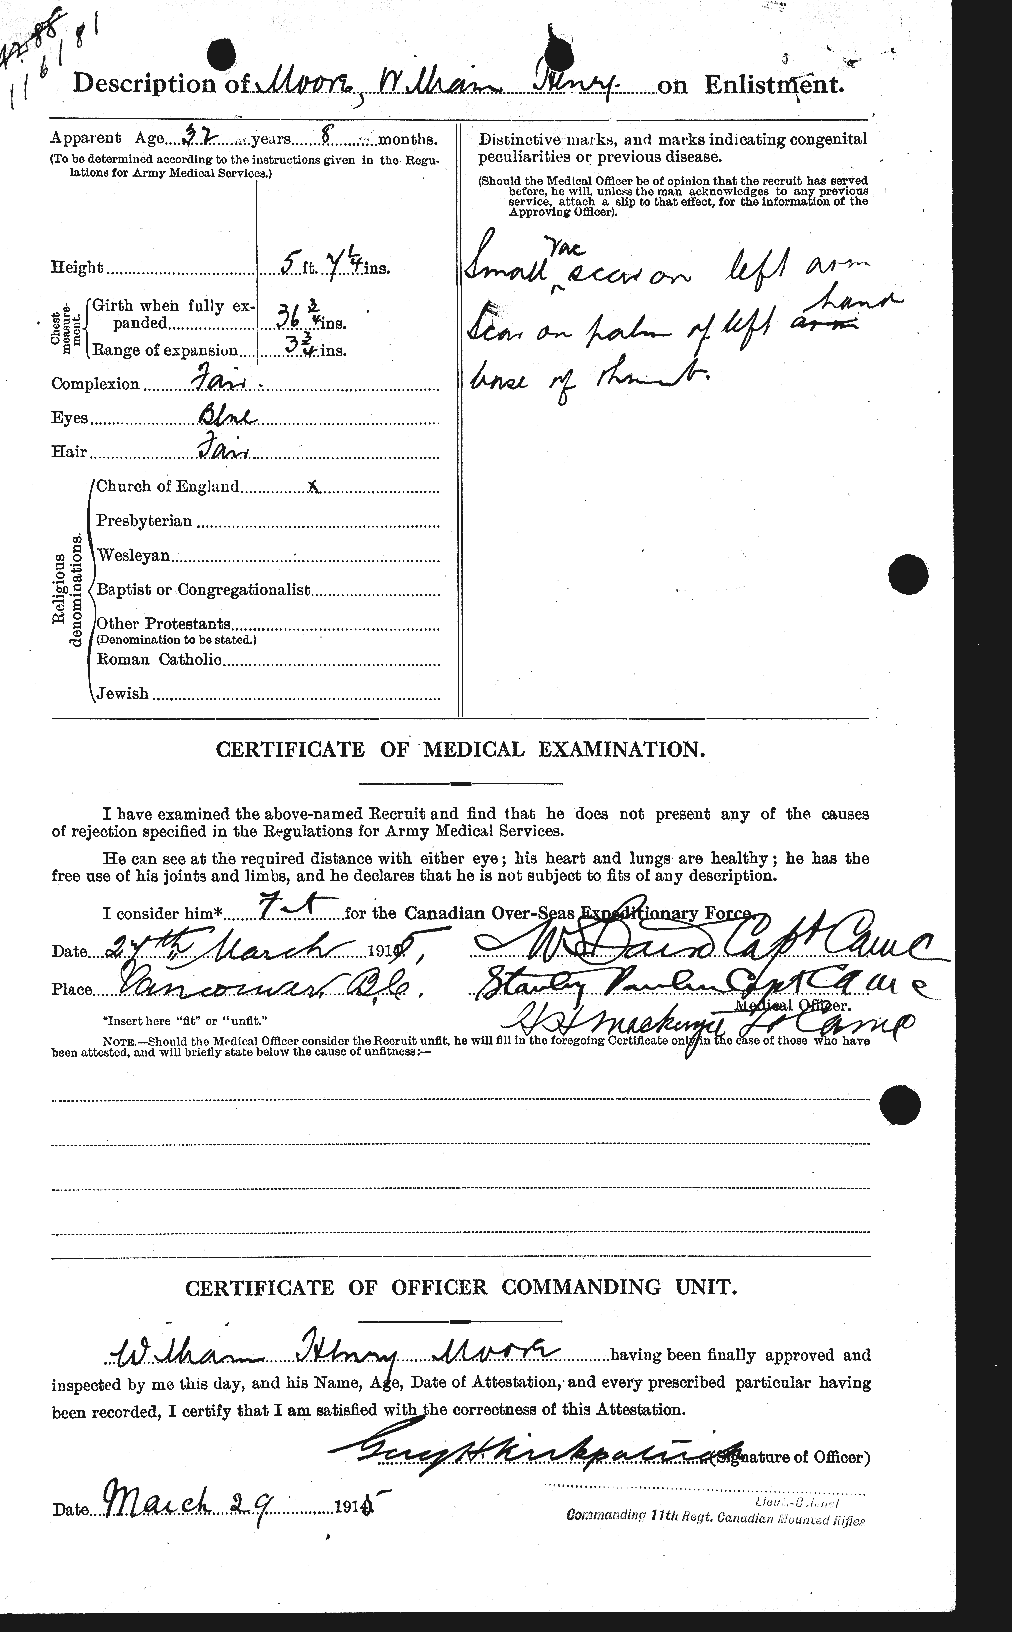 Personnel Records of the First World War - CEF 505827b